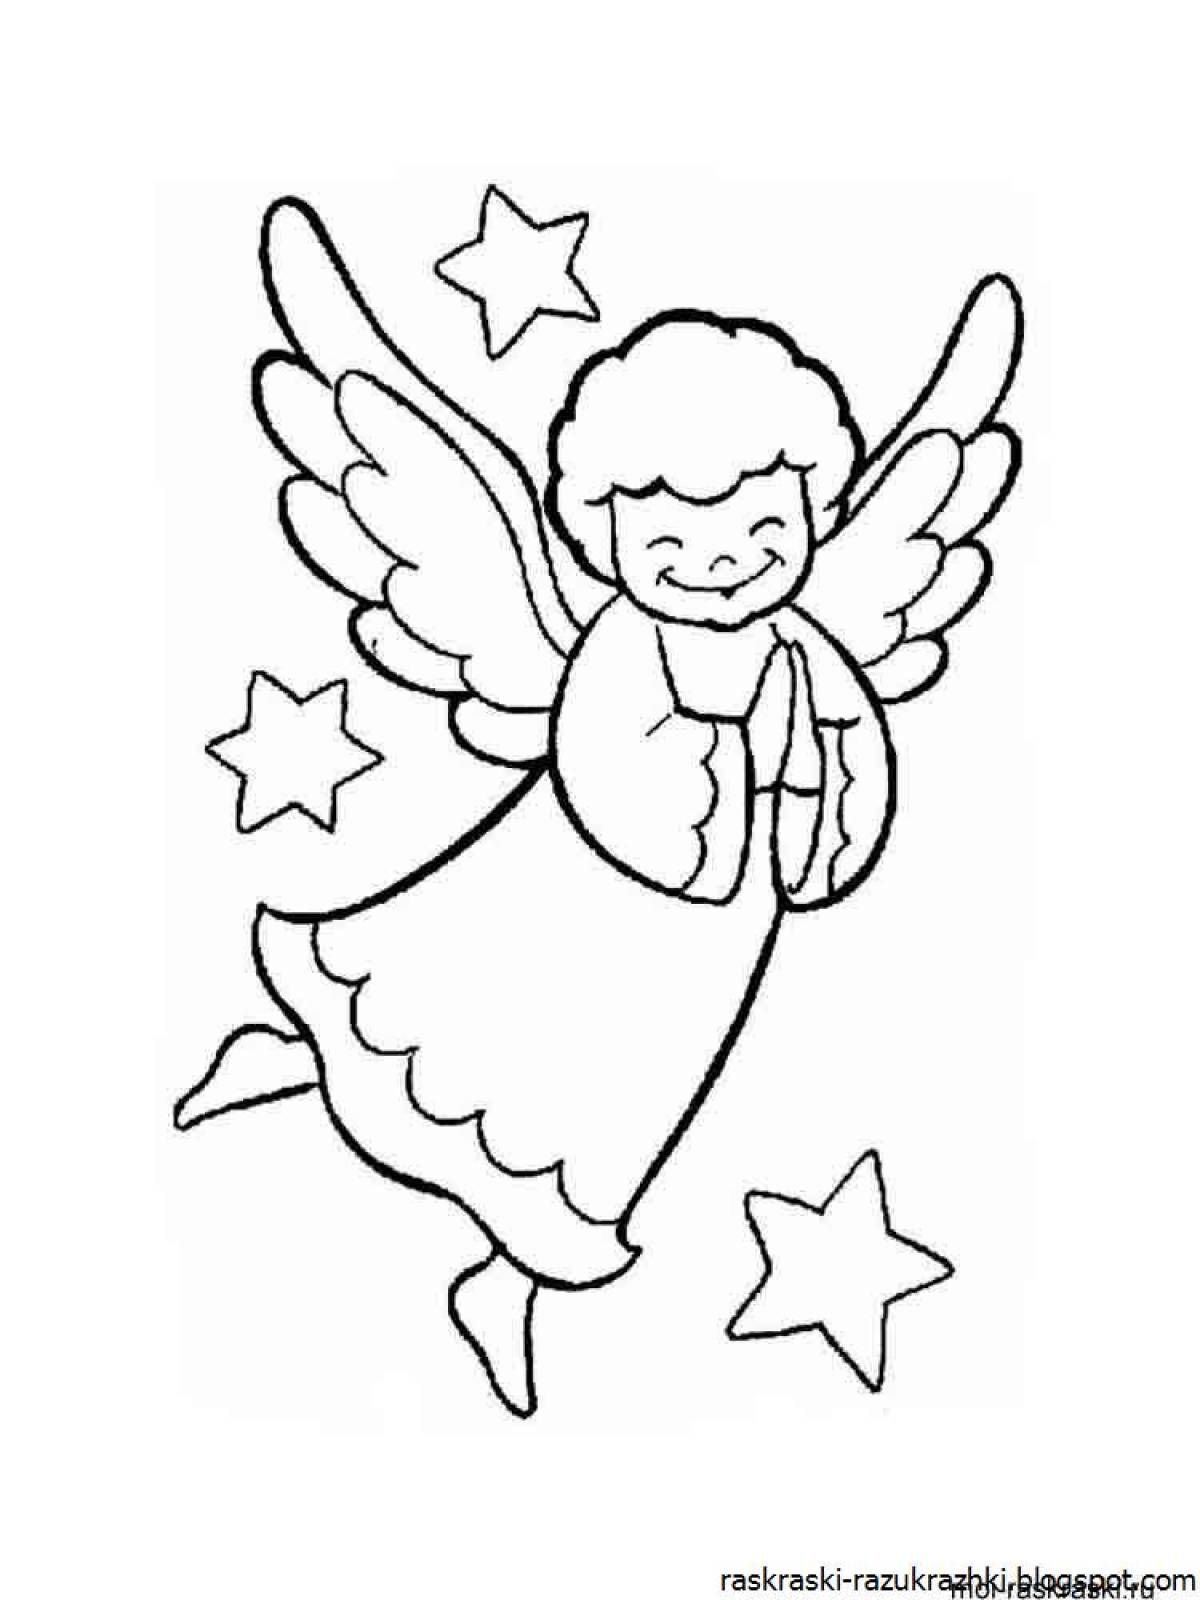 Sparkling angel with wings coloring book for kids